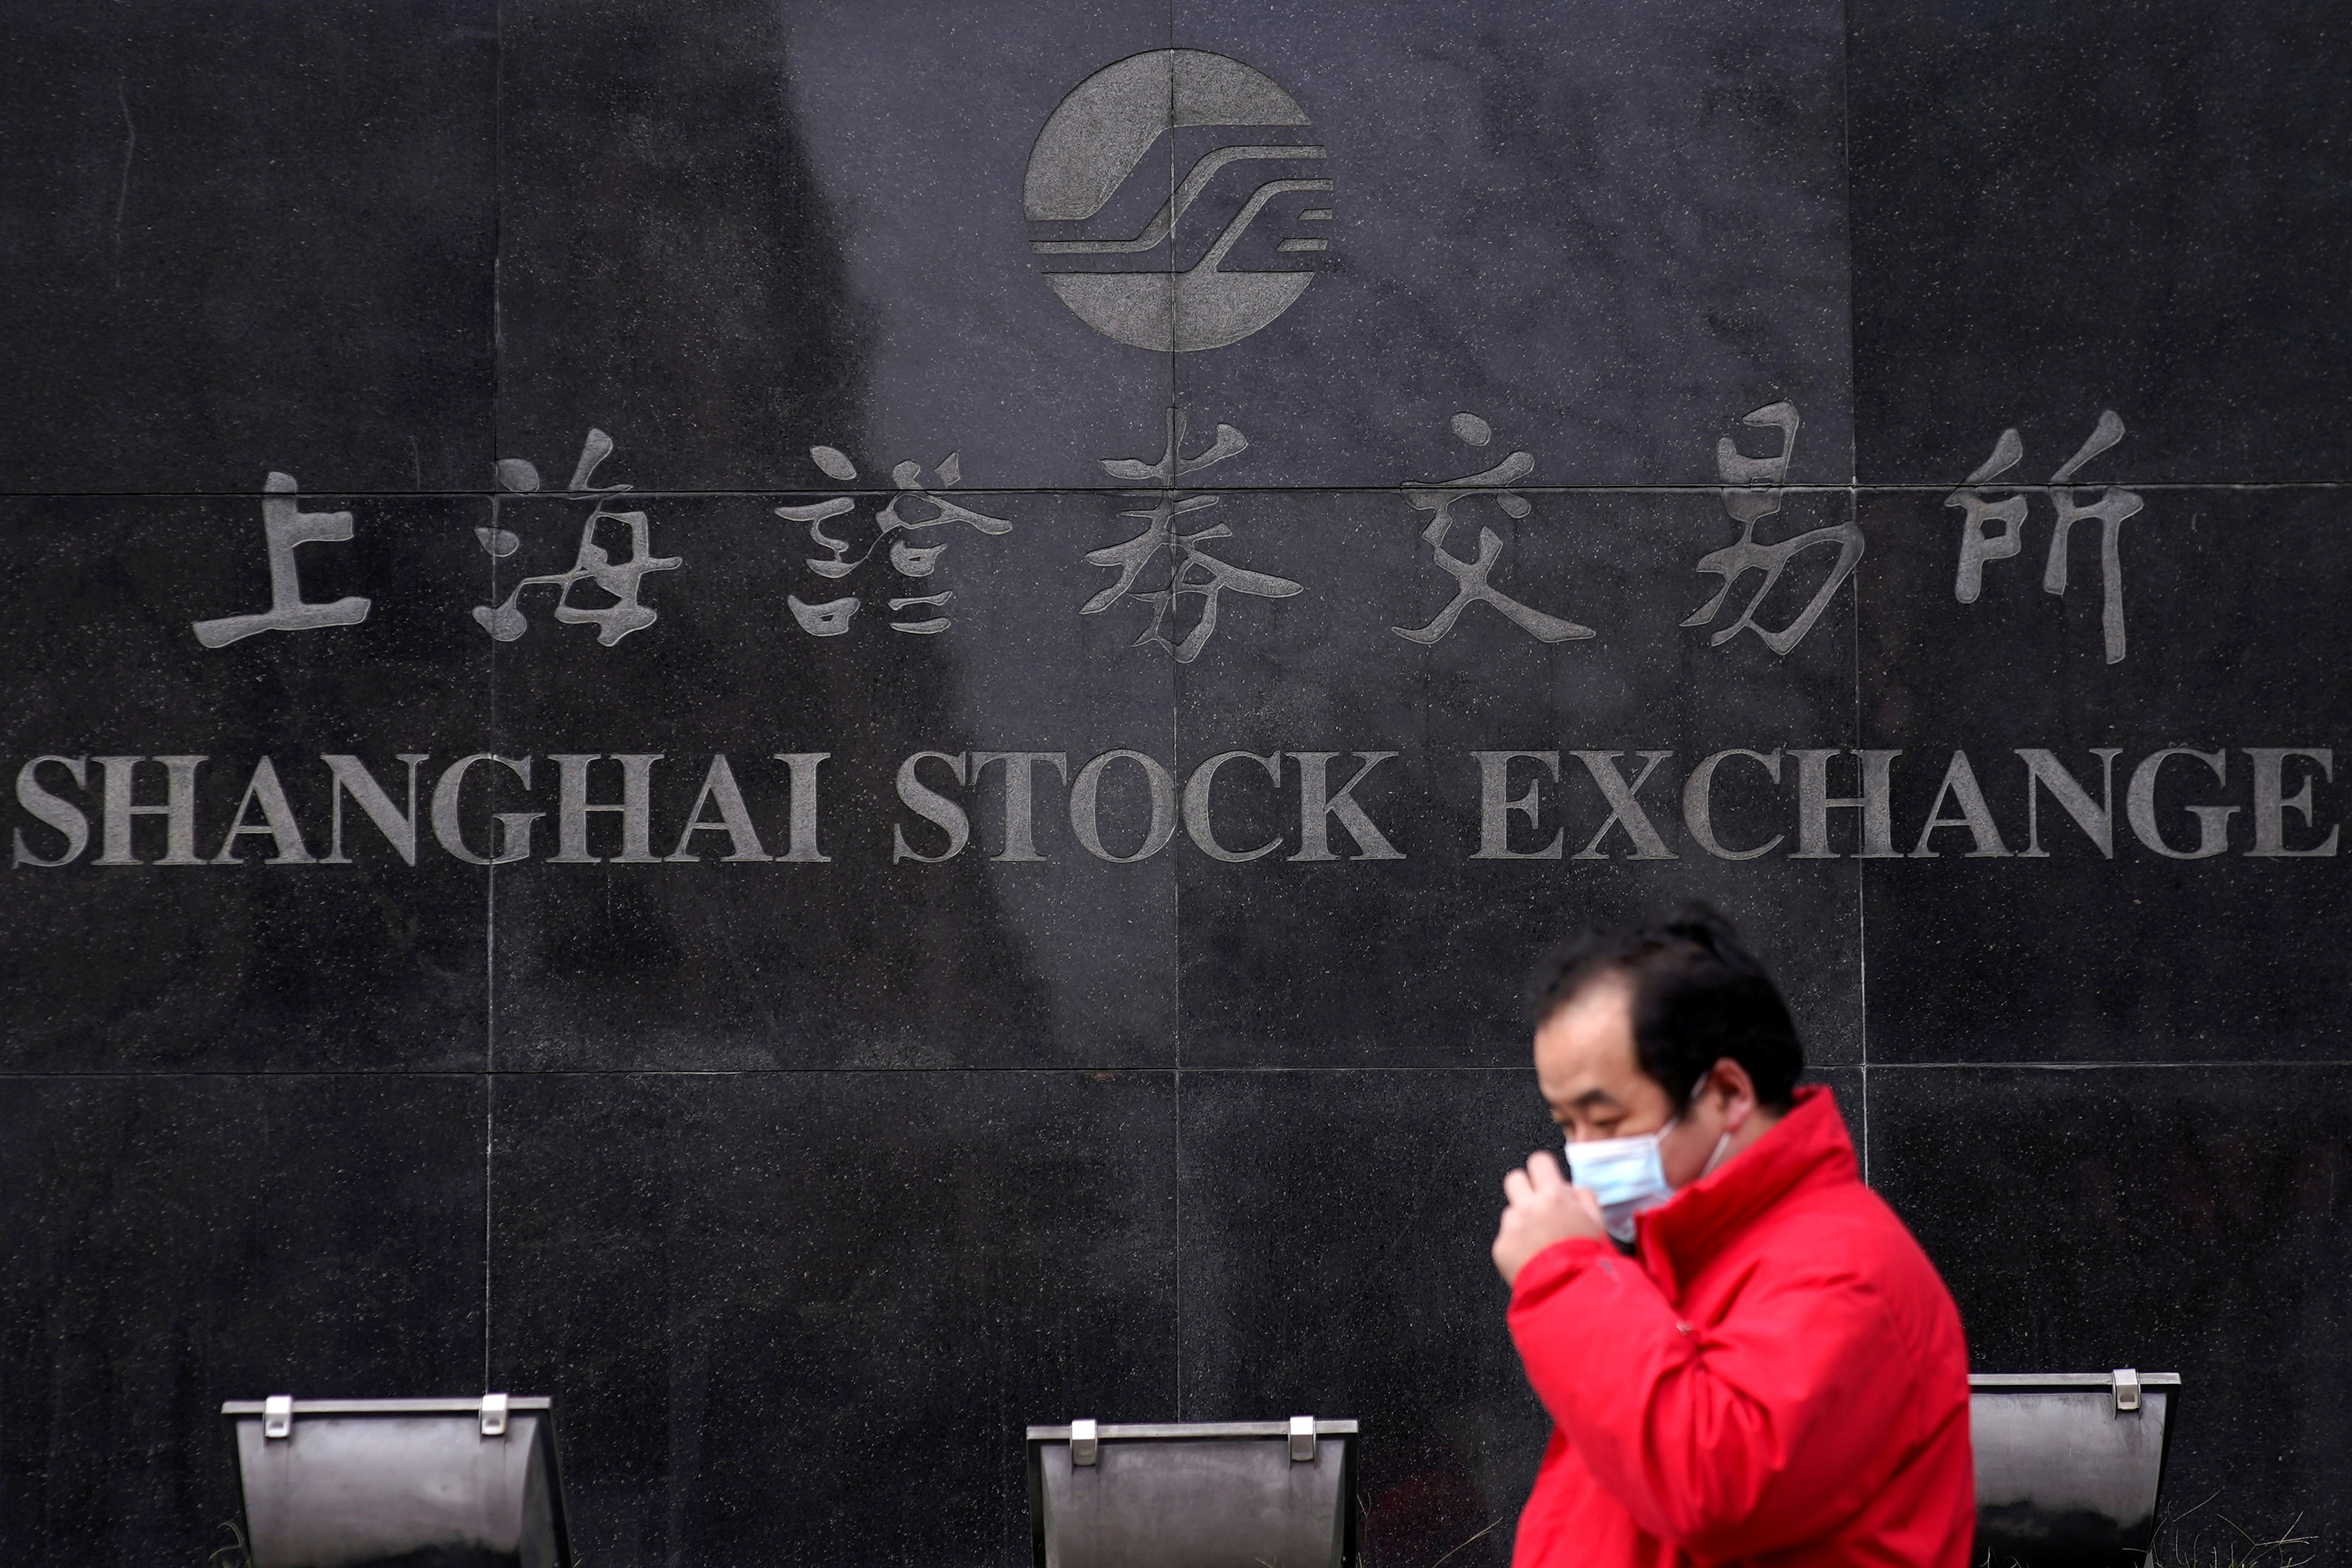 Factbox-How China is trying to boost its stock market